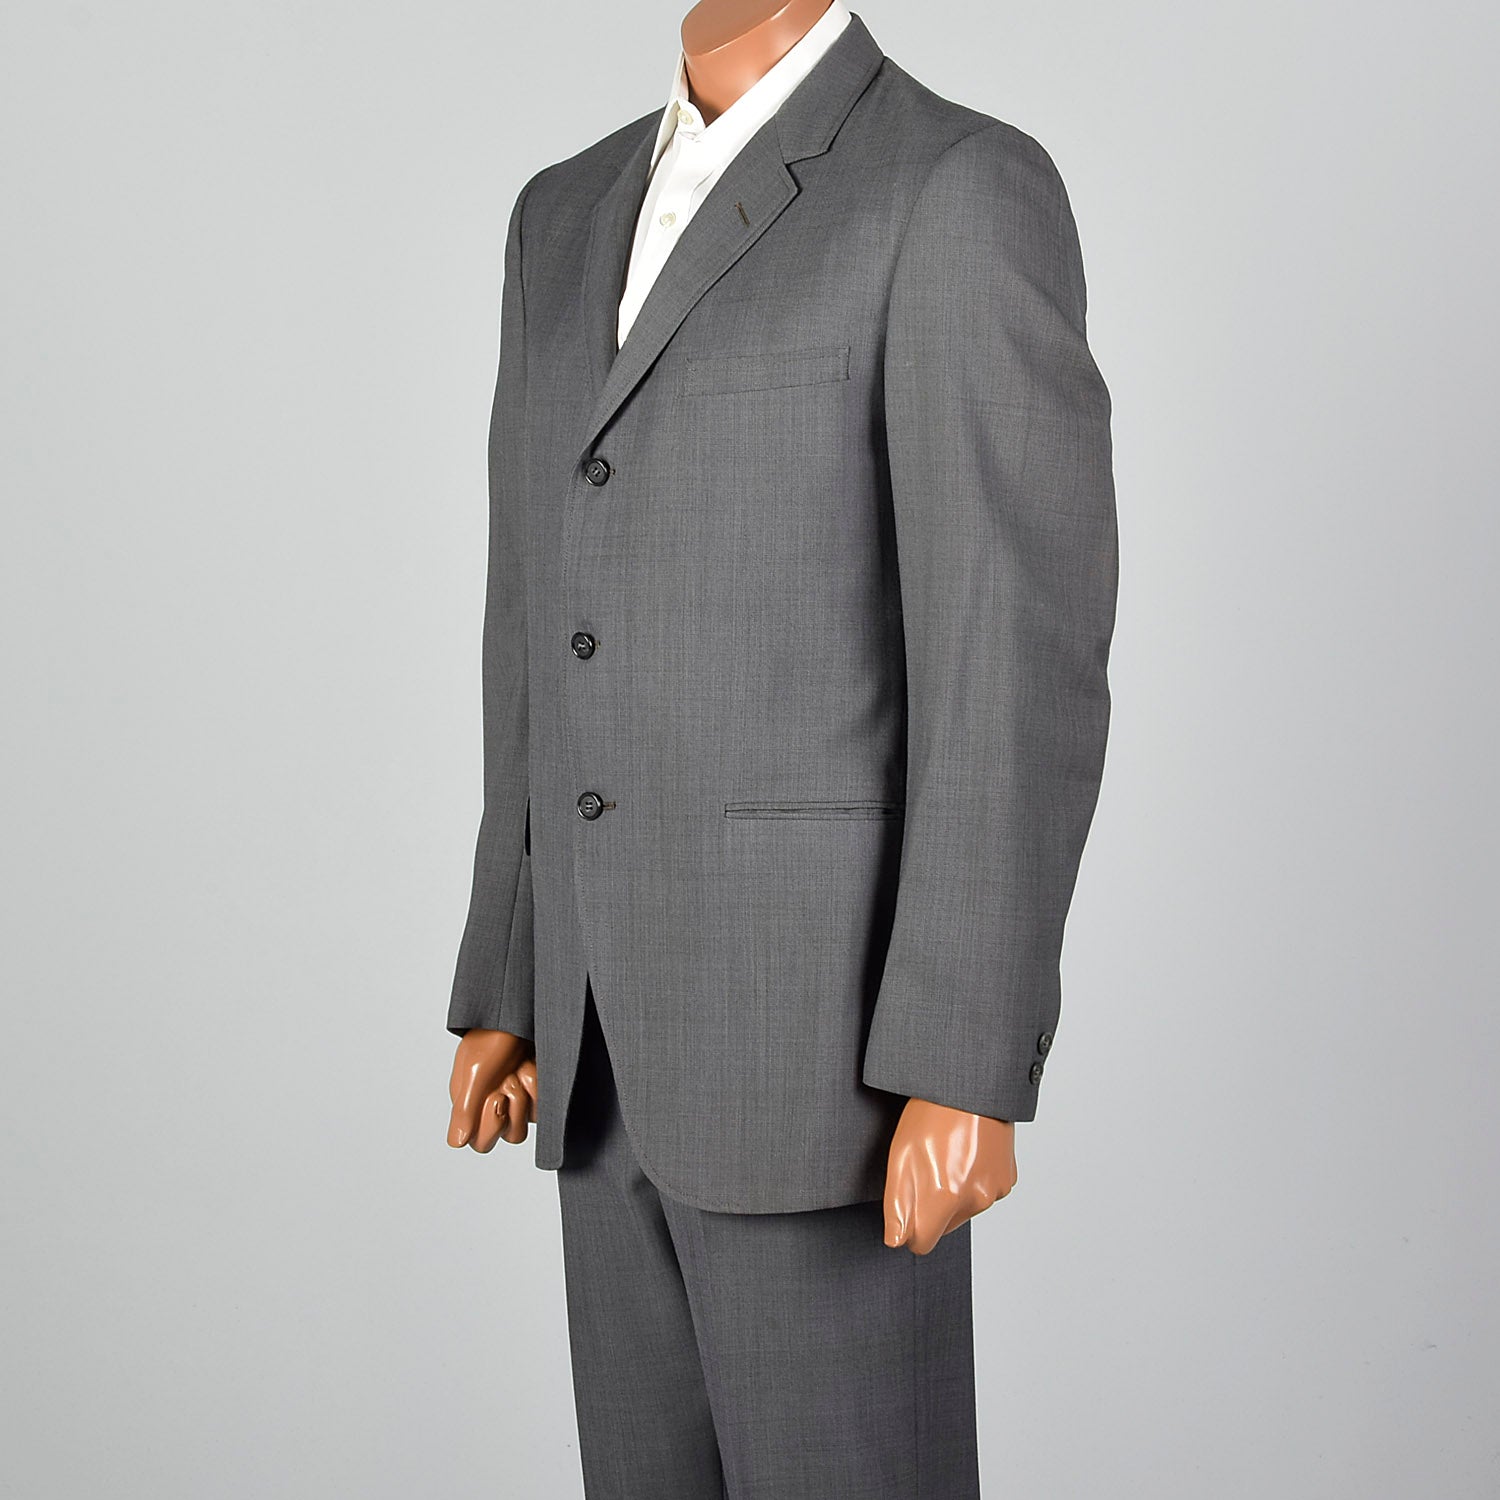 Large 1960s Gray Two Piece Suit